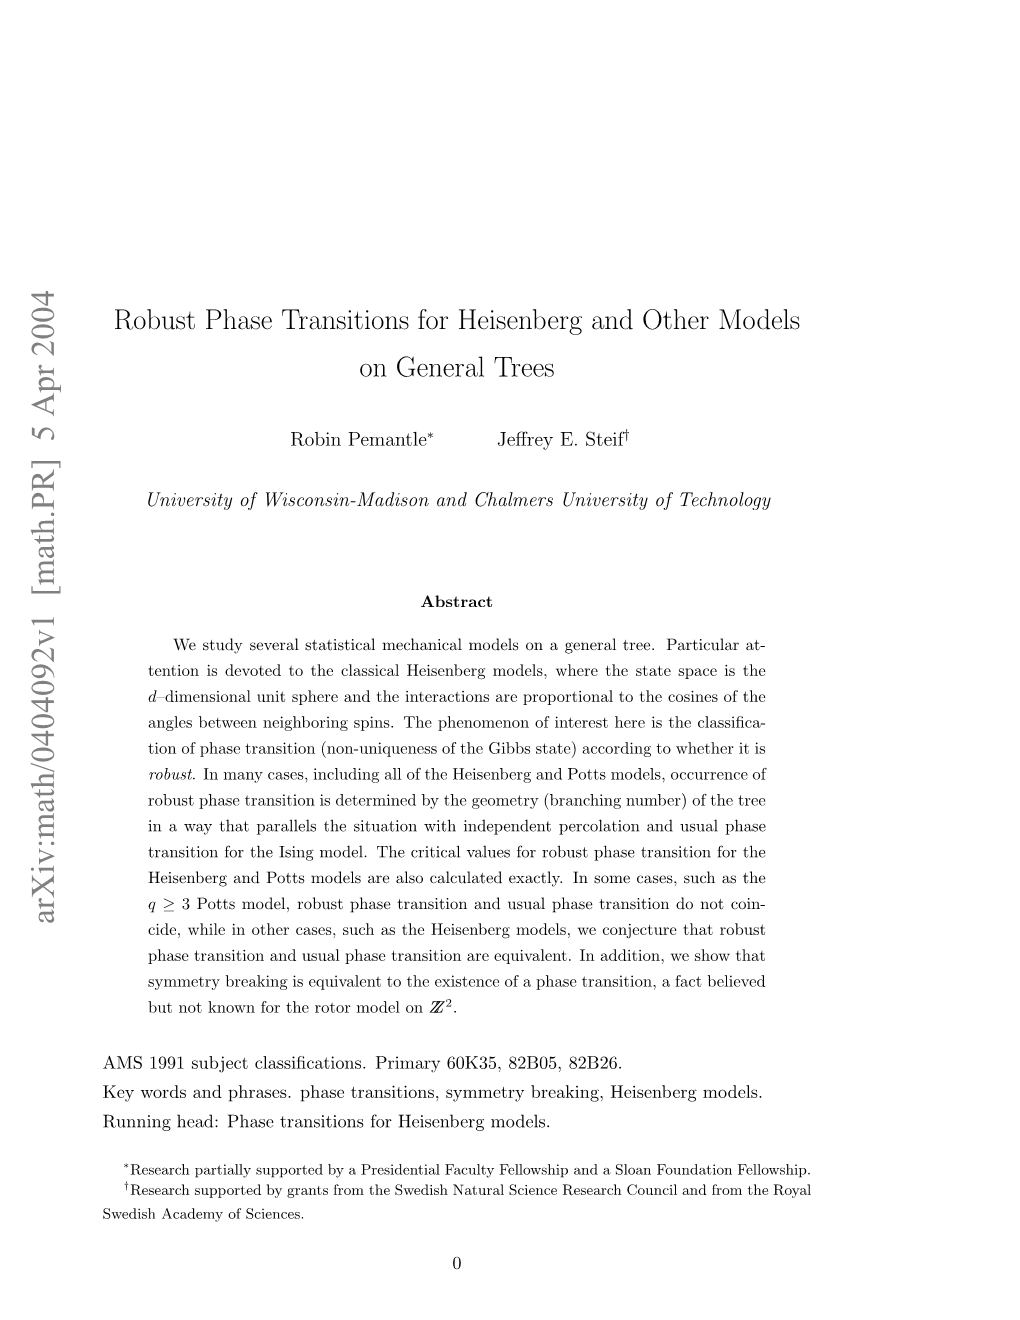 Robust Phase Transitions for Heisenberg and Other Models On